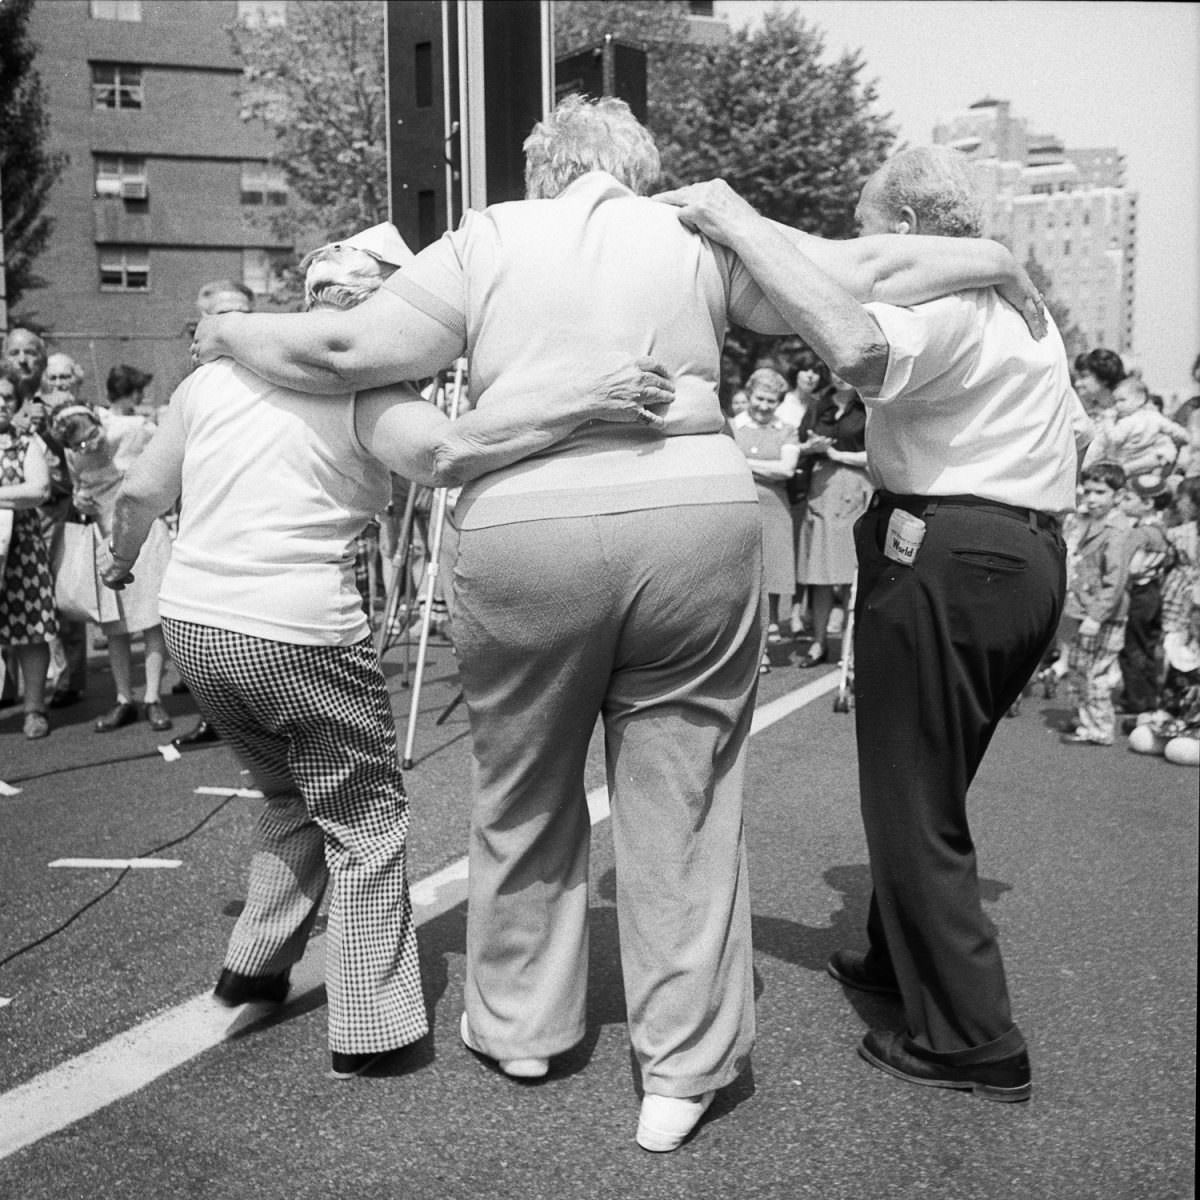 Dancing At The Lower East Side Street Festival, 1978